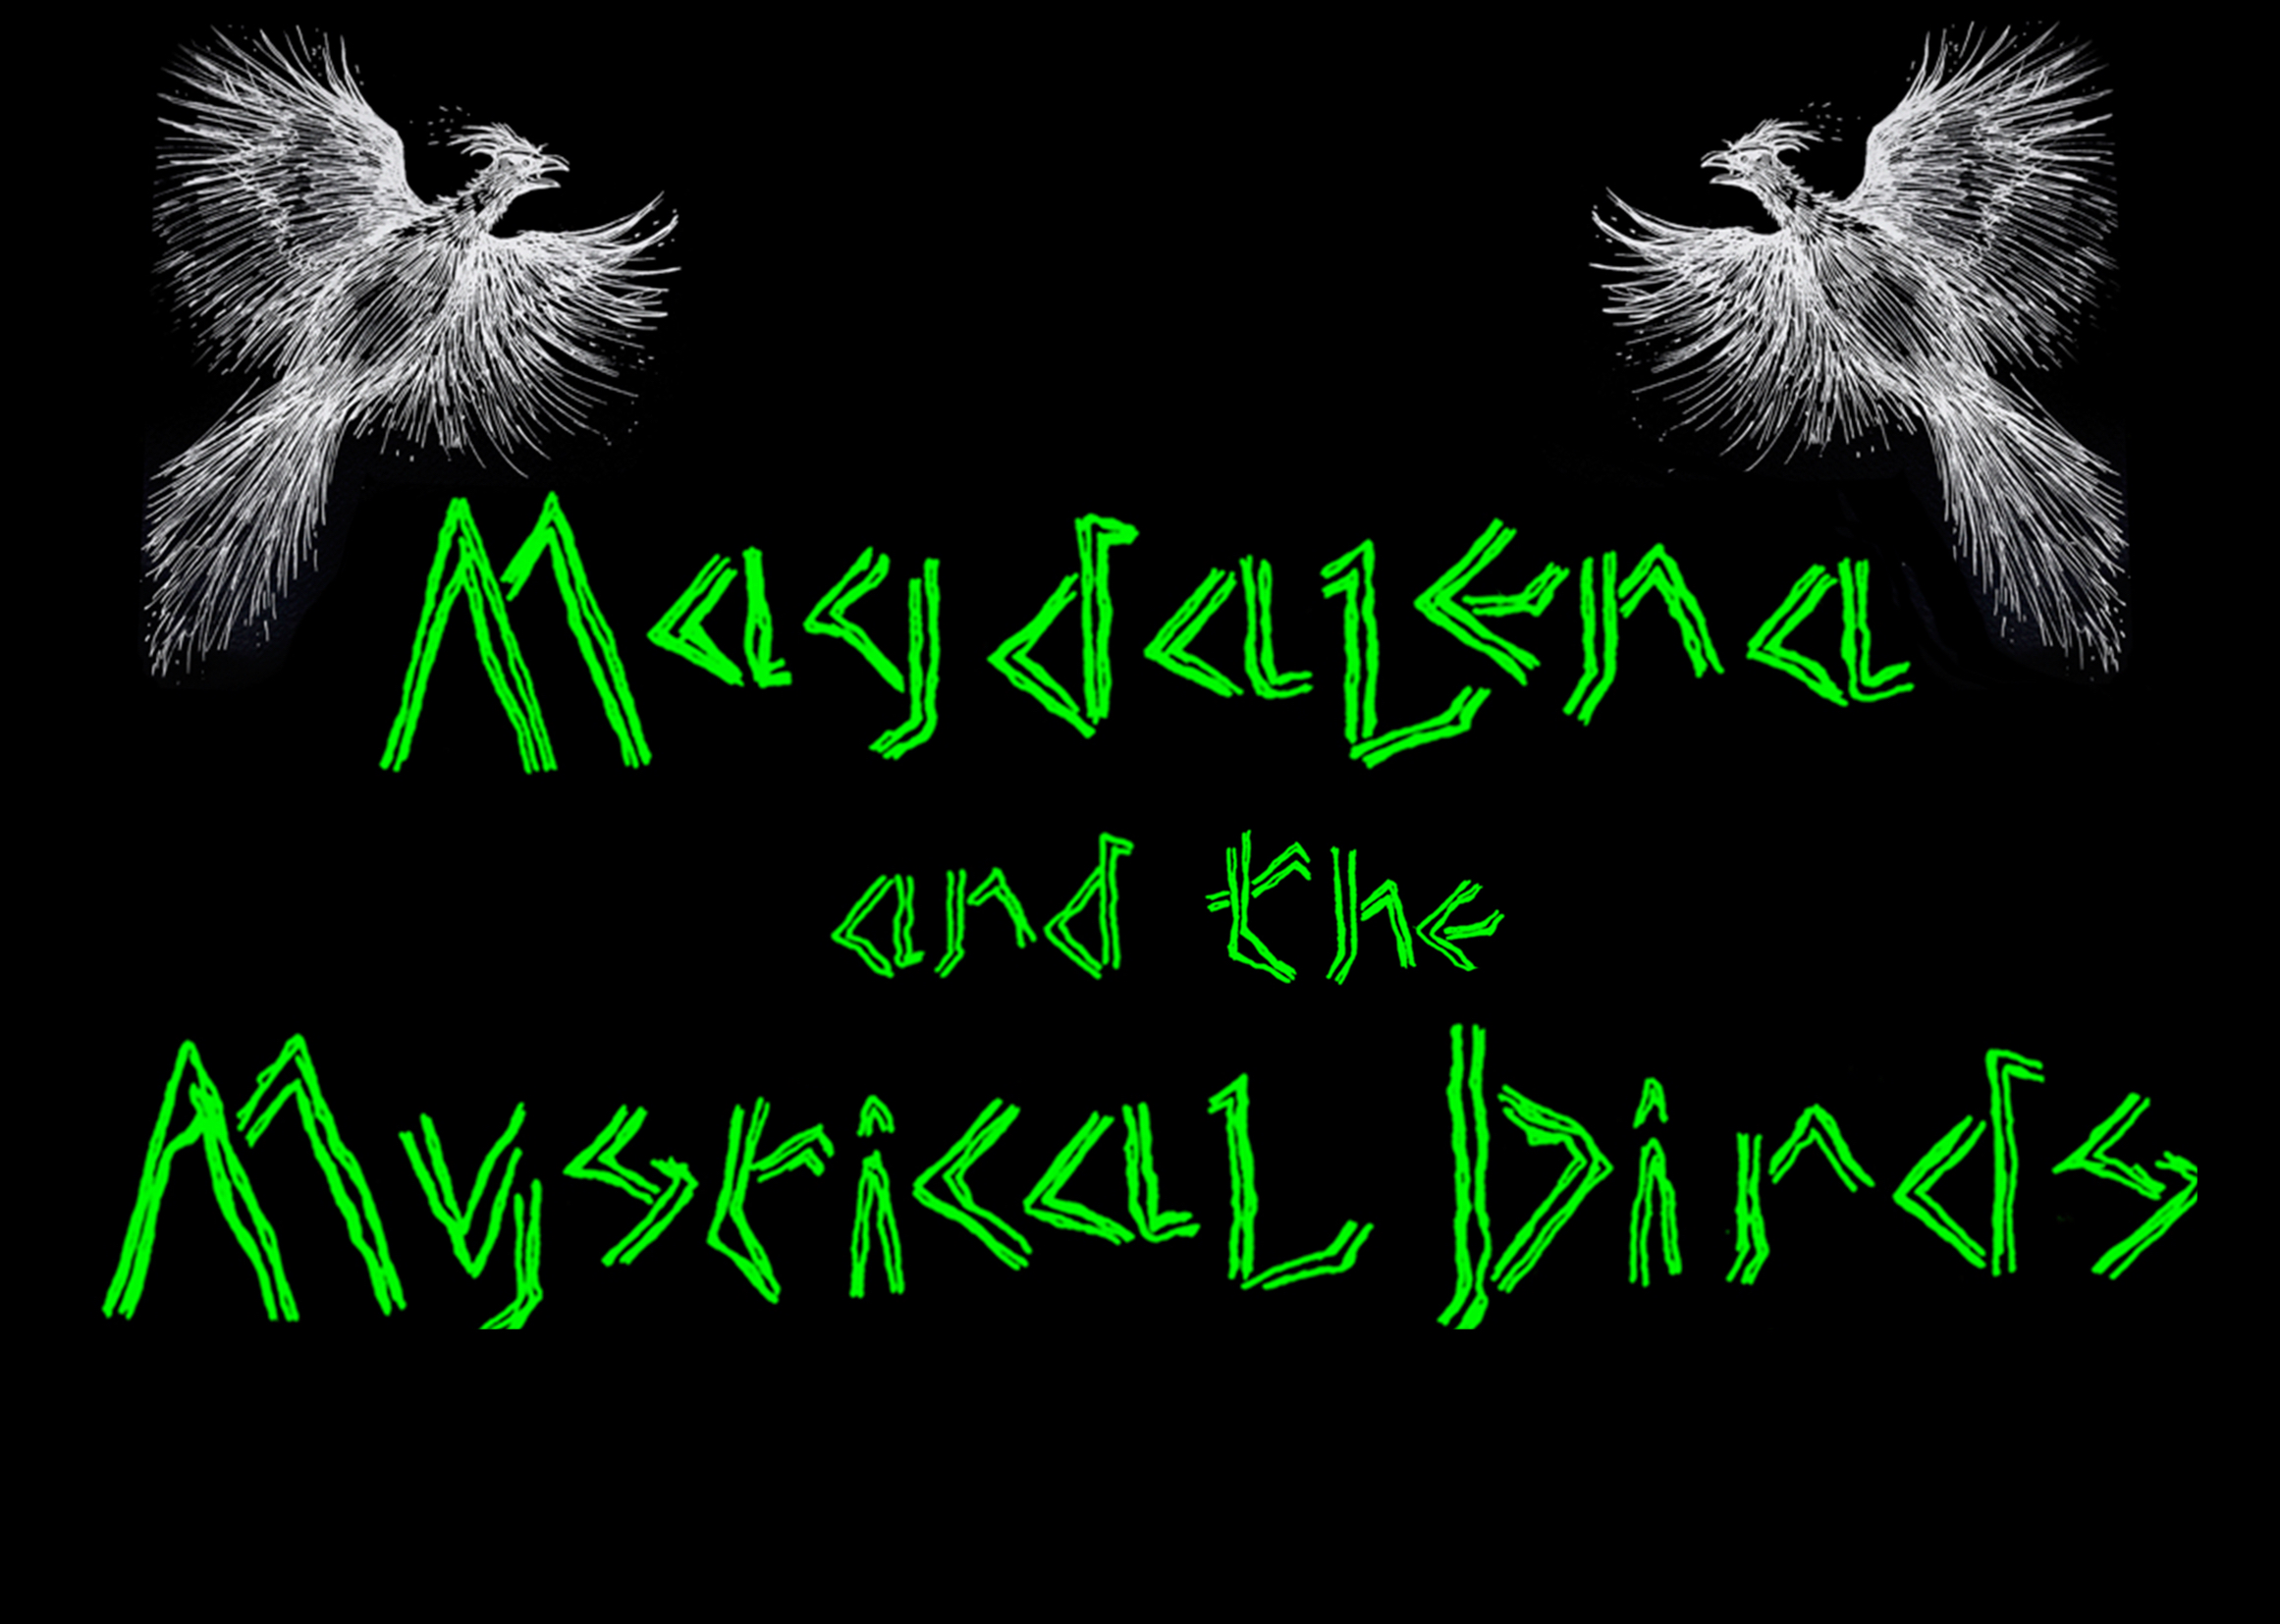 Magdalena and the Mystical Birds